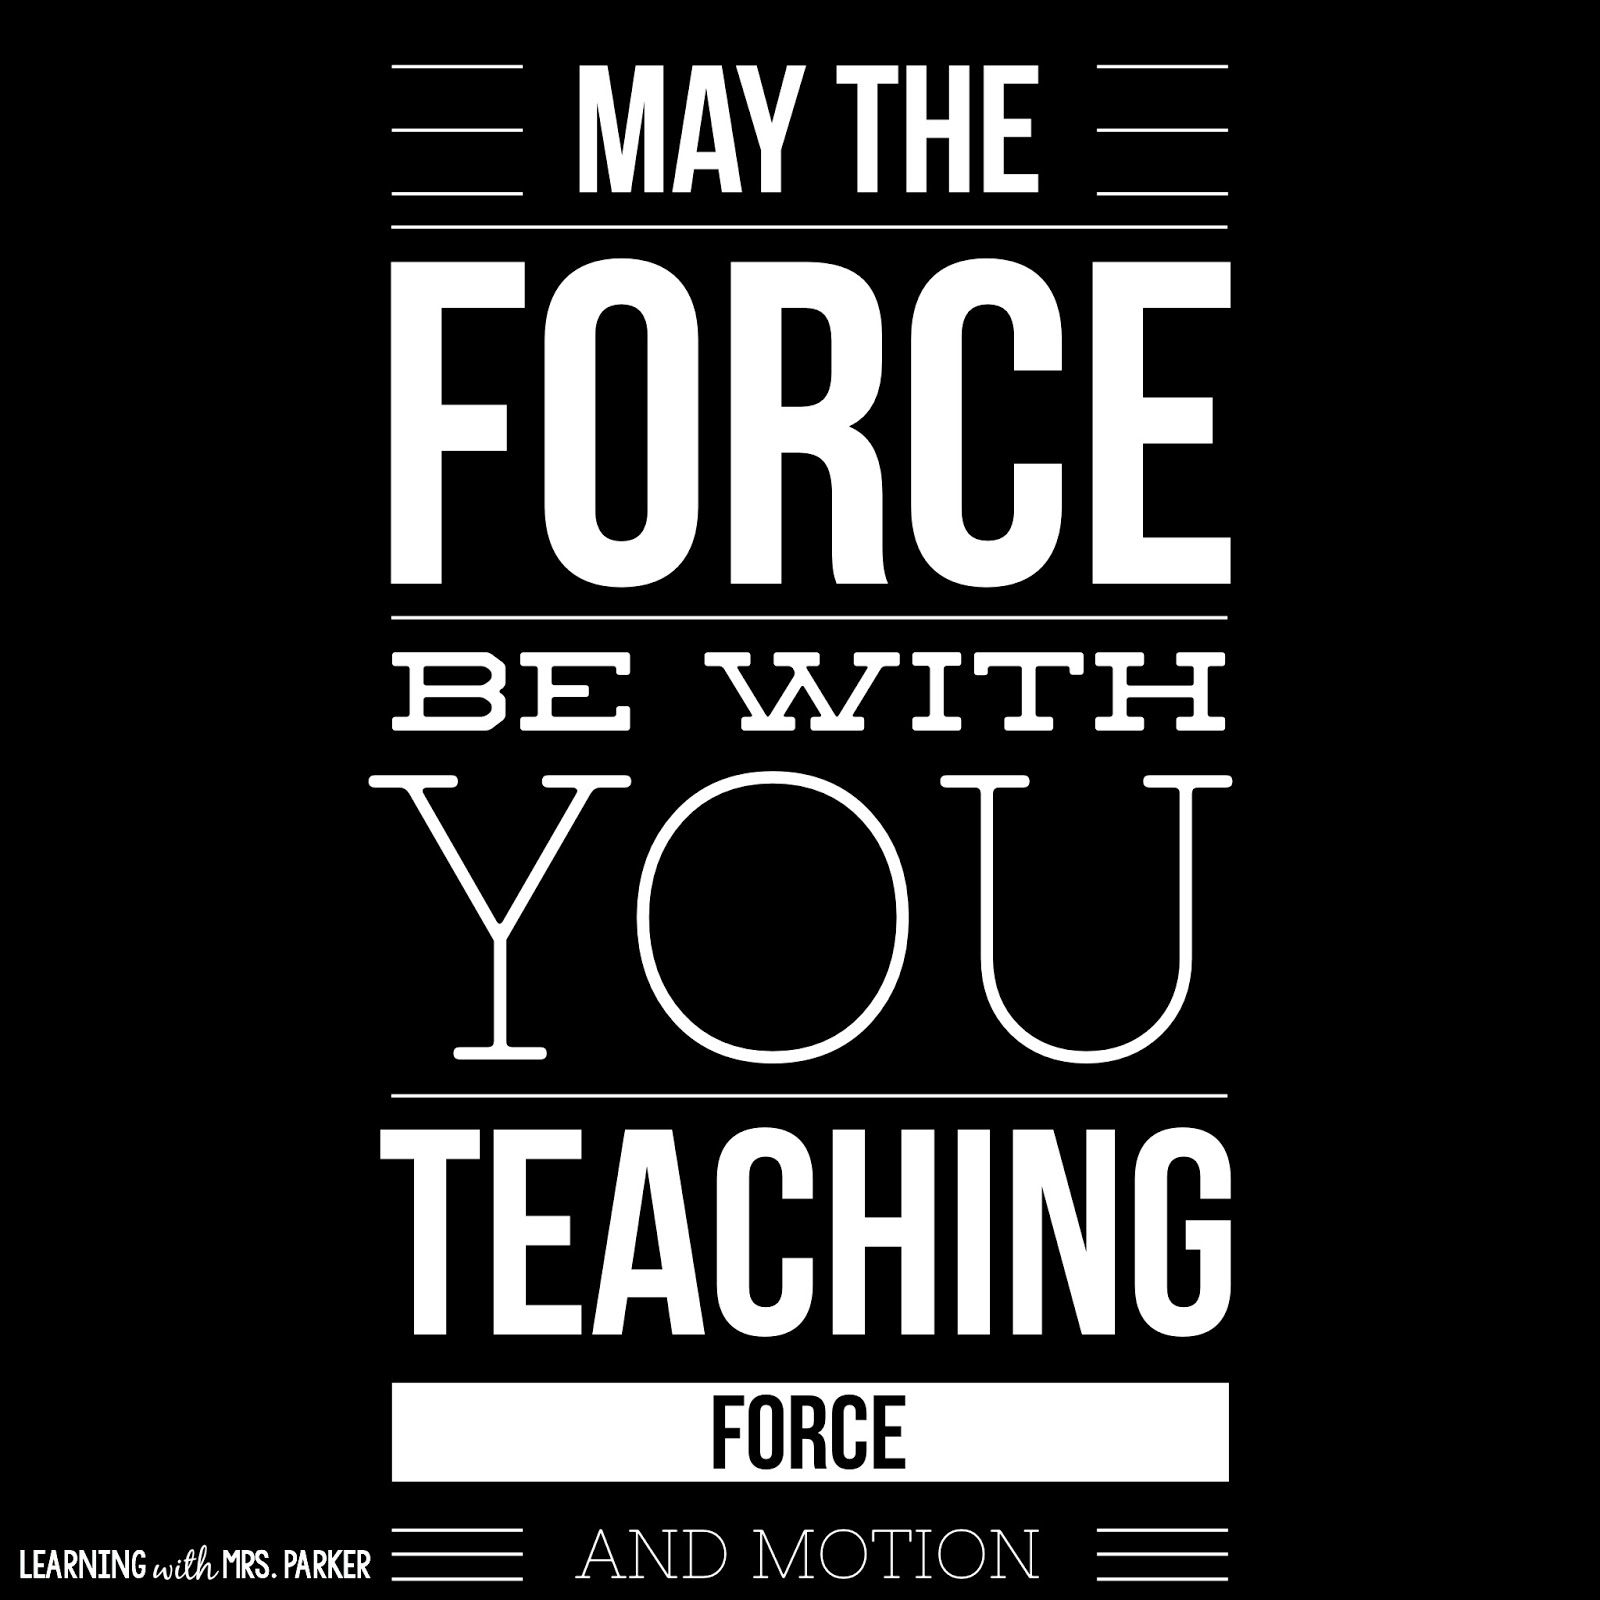 May The Force Be With You Teaching Force And Motion Learning With Mrs Parker